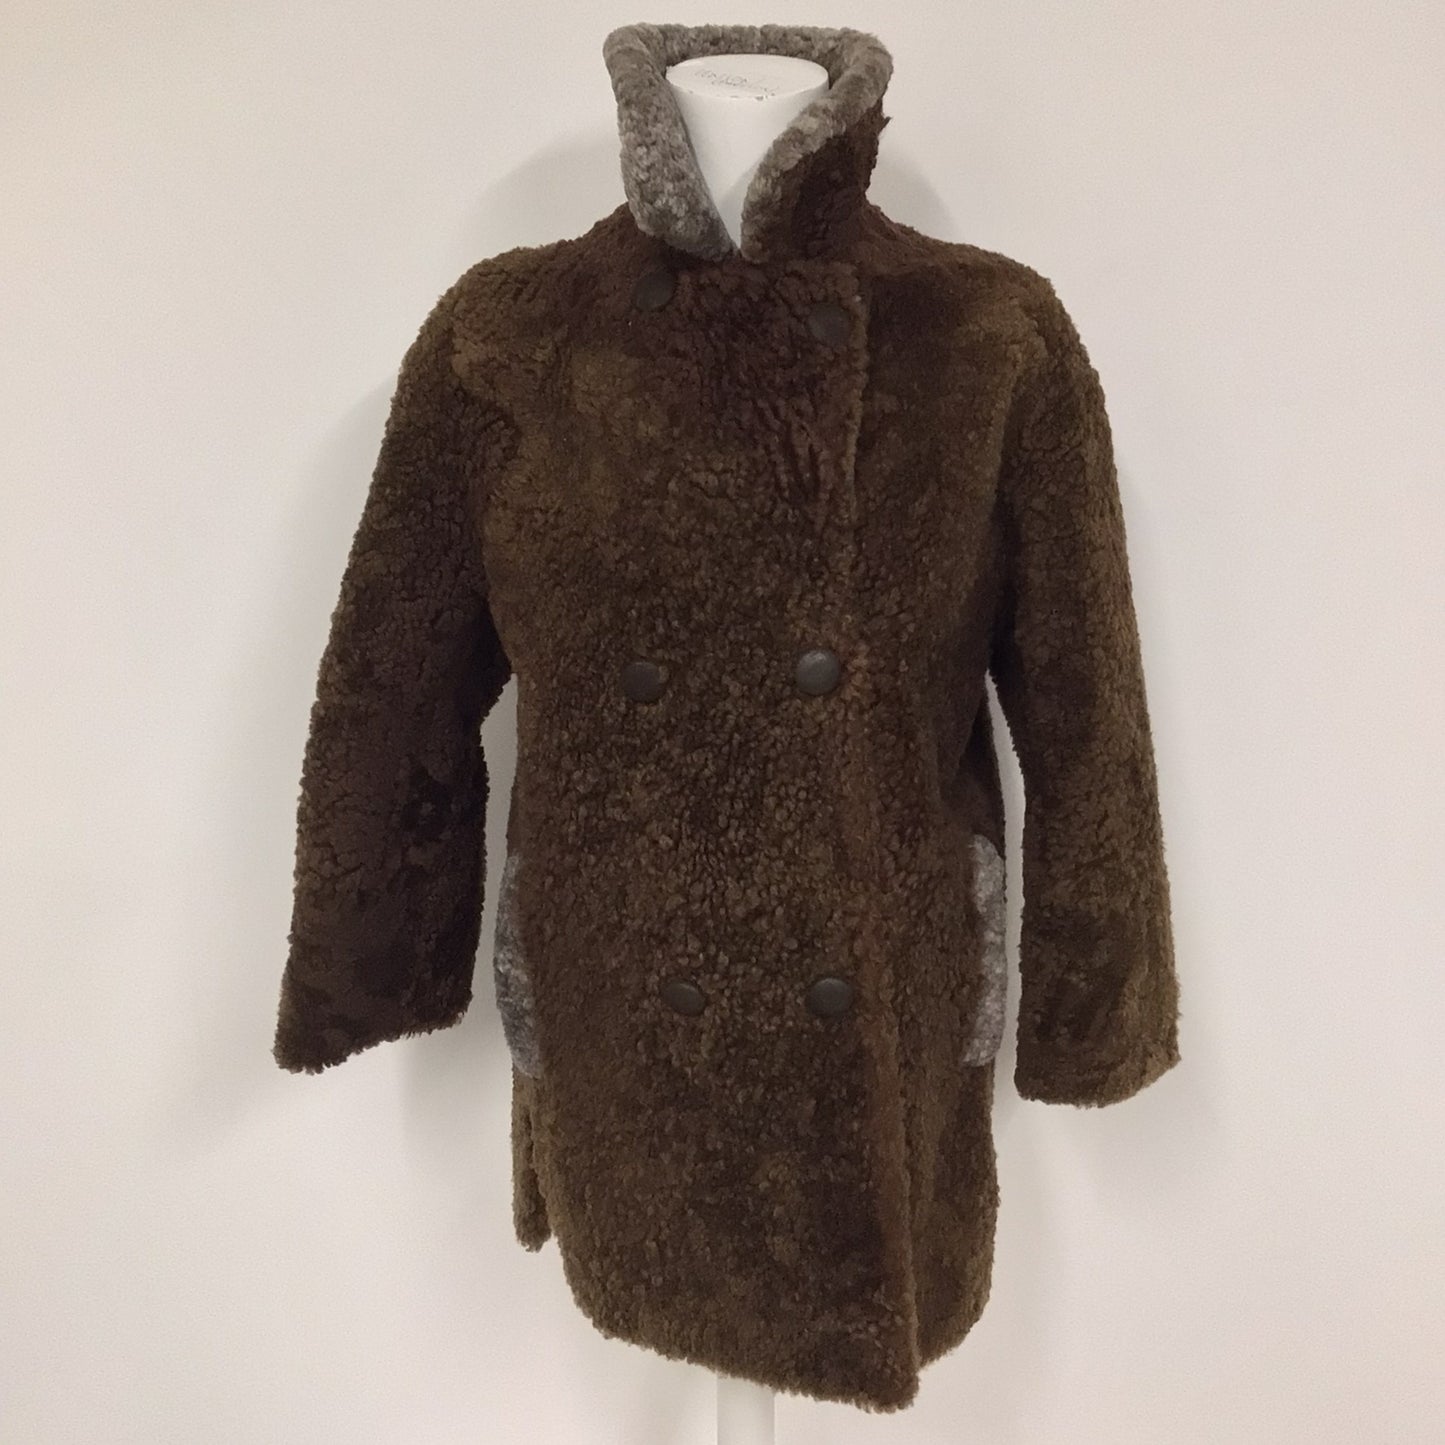 Vintage Woolly Teddy Bear Brown & Grey Coat Size S (approx.)